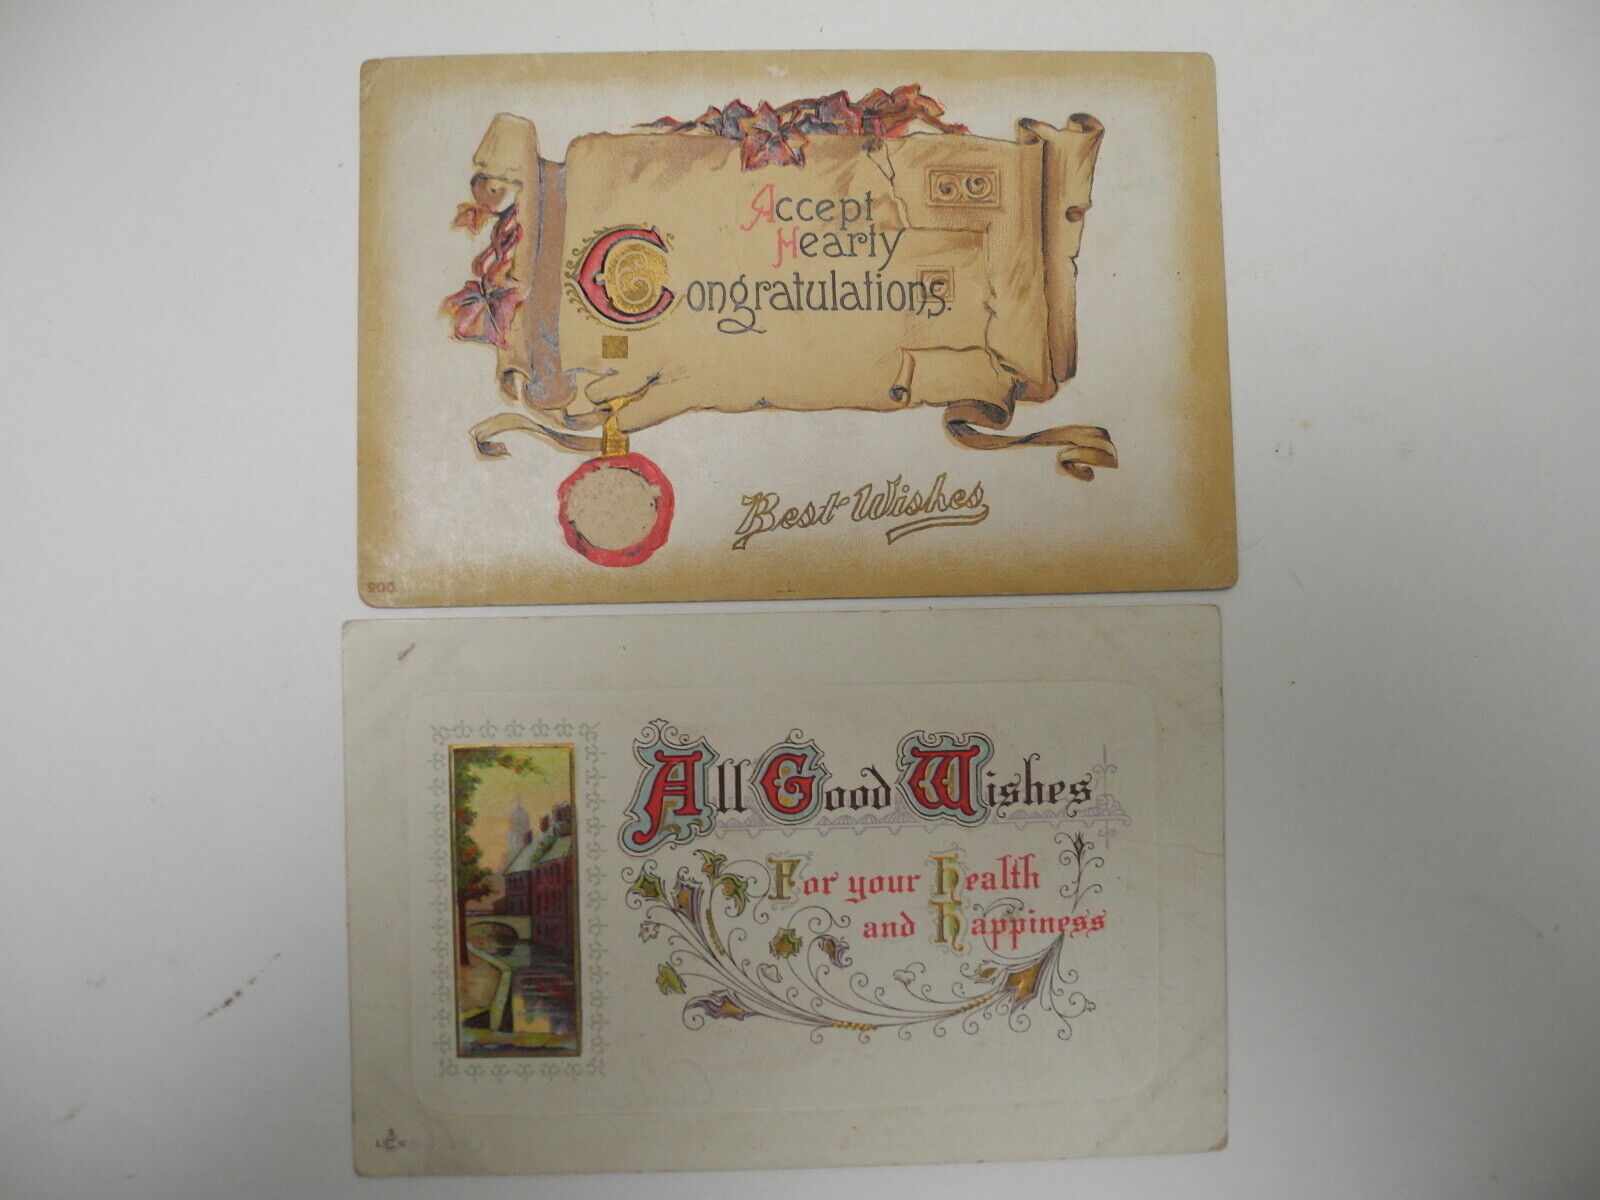 All Good Wishes and Accept Hearty Congratulations Early 1900\'s Posted Postcards